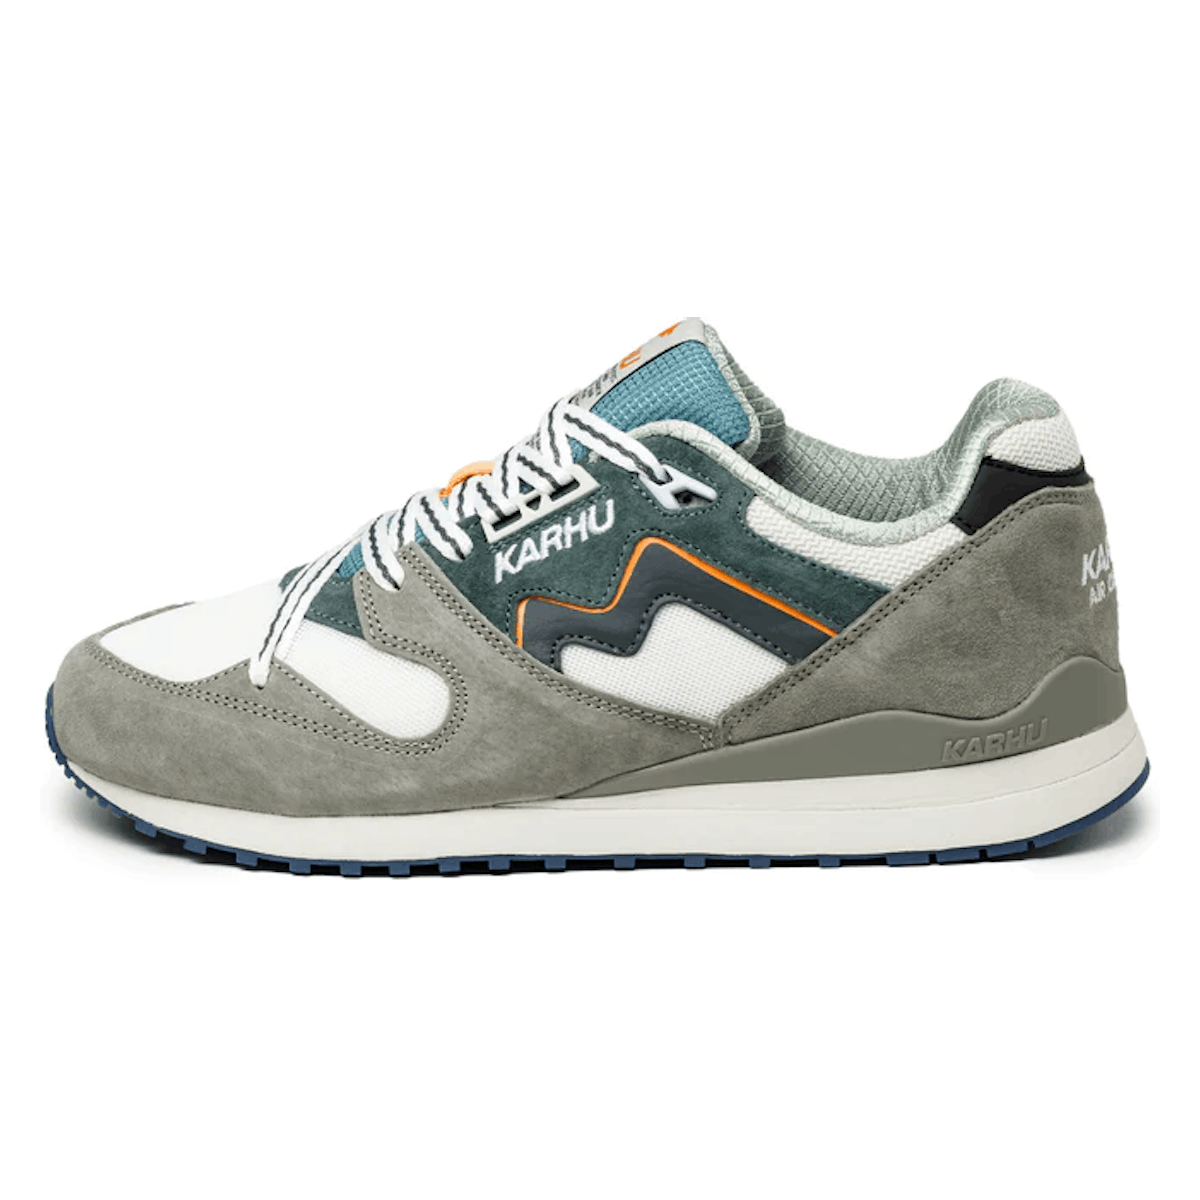 Karhu Synchron Classic "The Forest Rules"